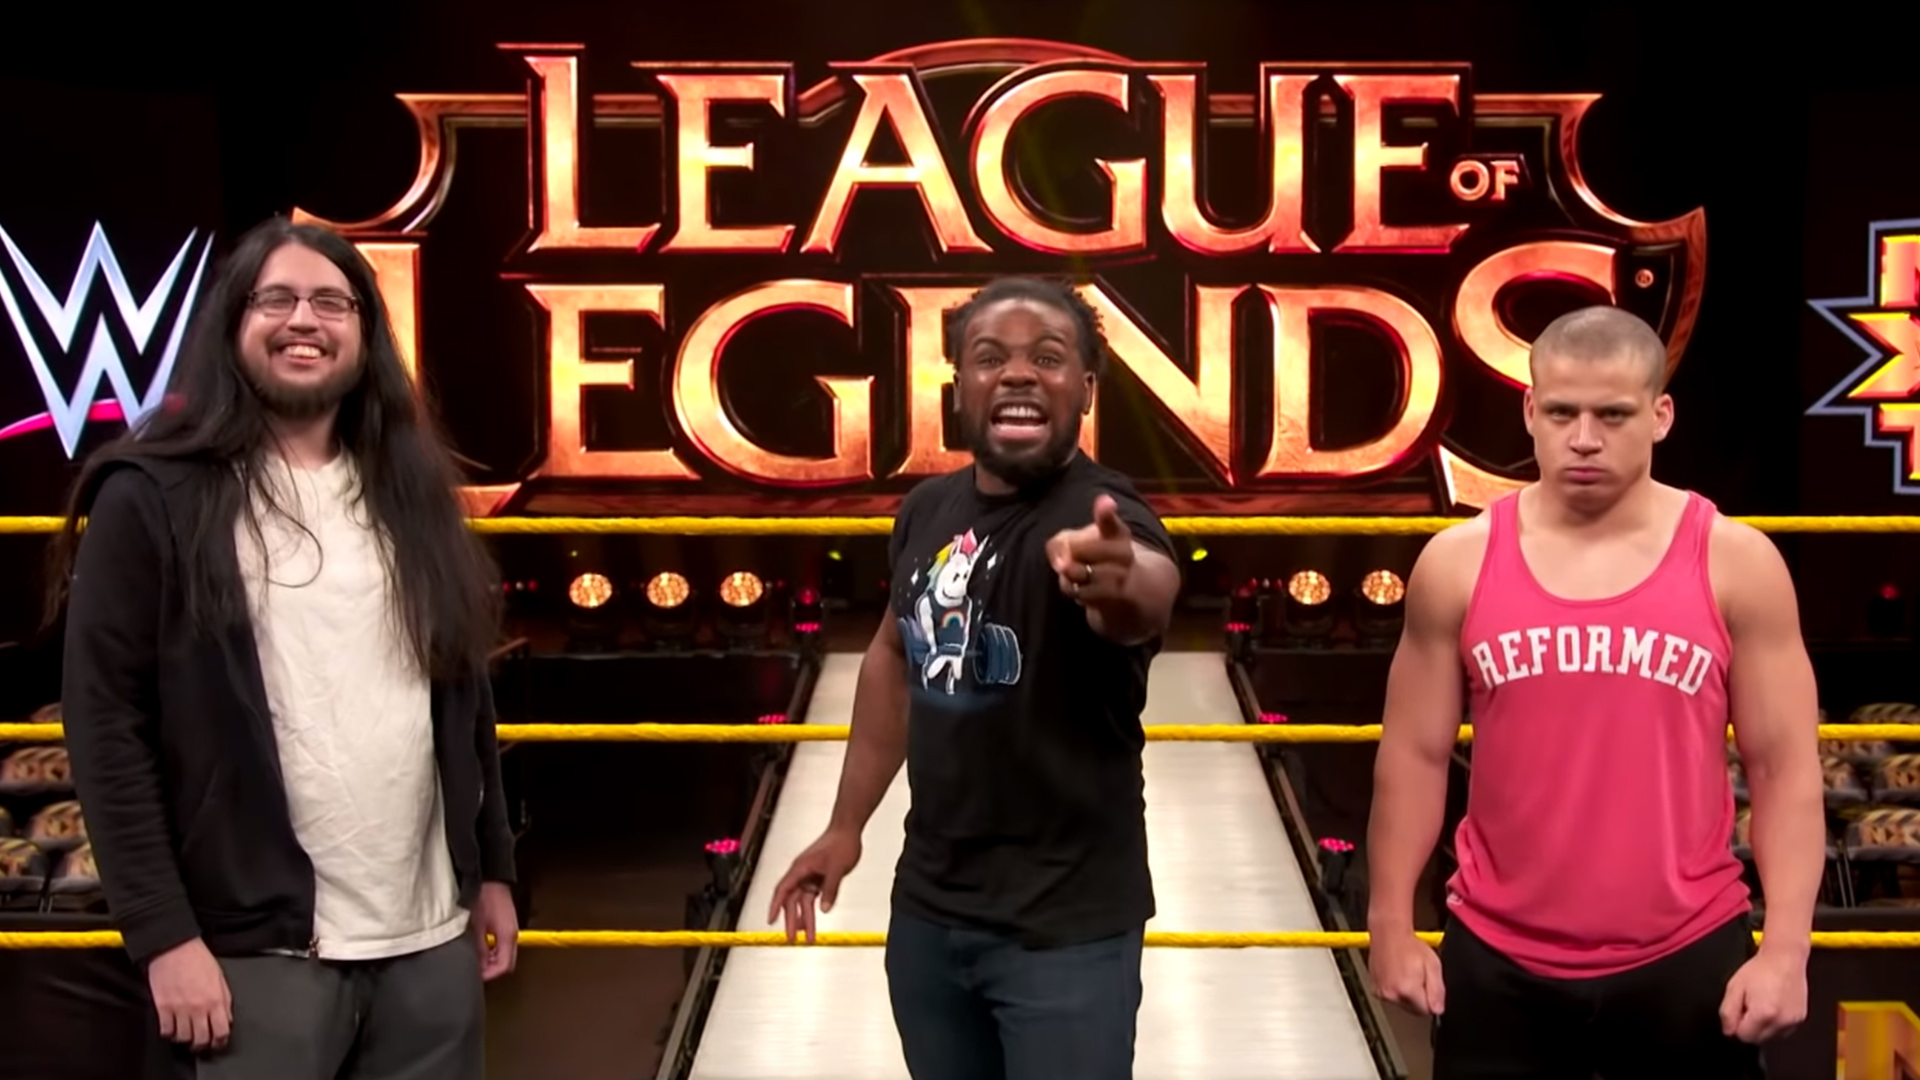 Tyler1 and Imaqtpie lead WWE stars in a League of Legends clash this Saturday